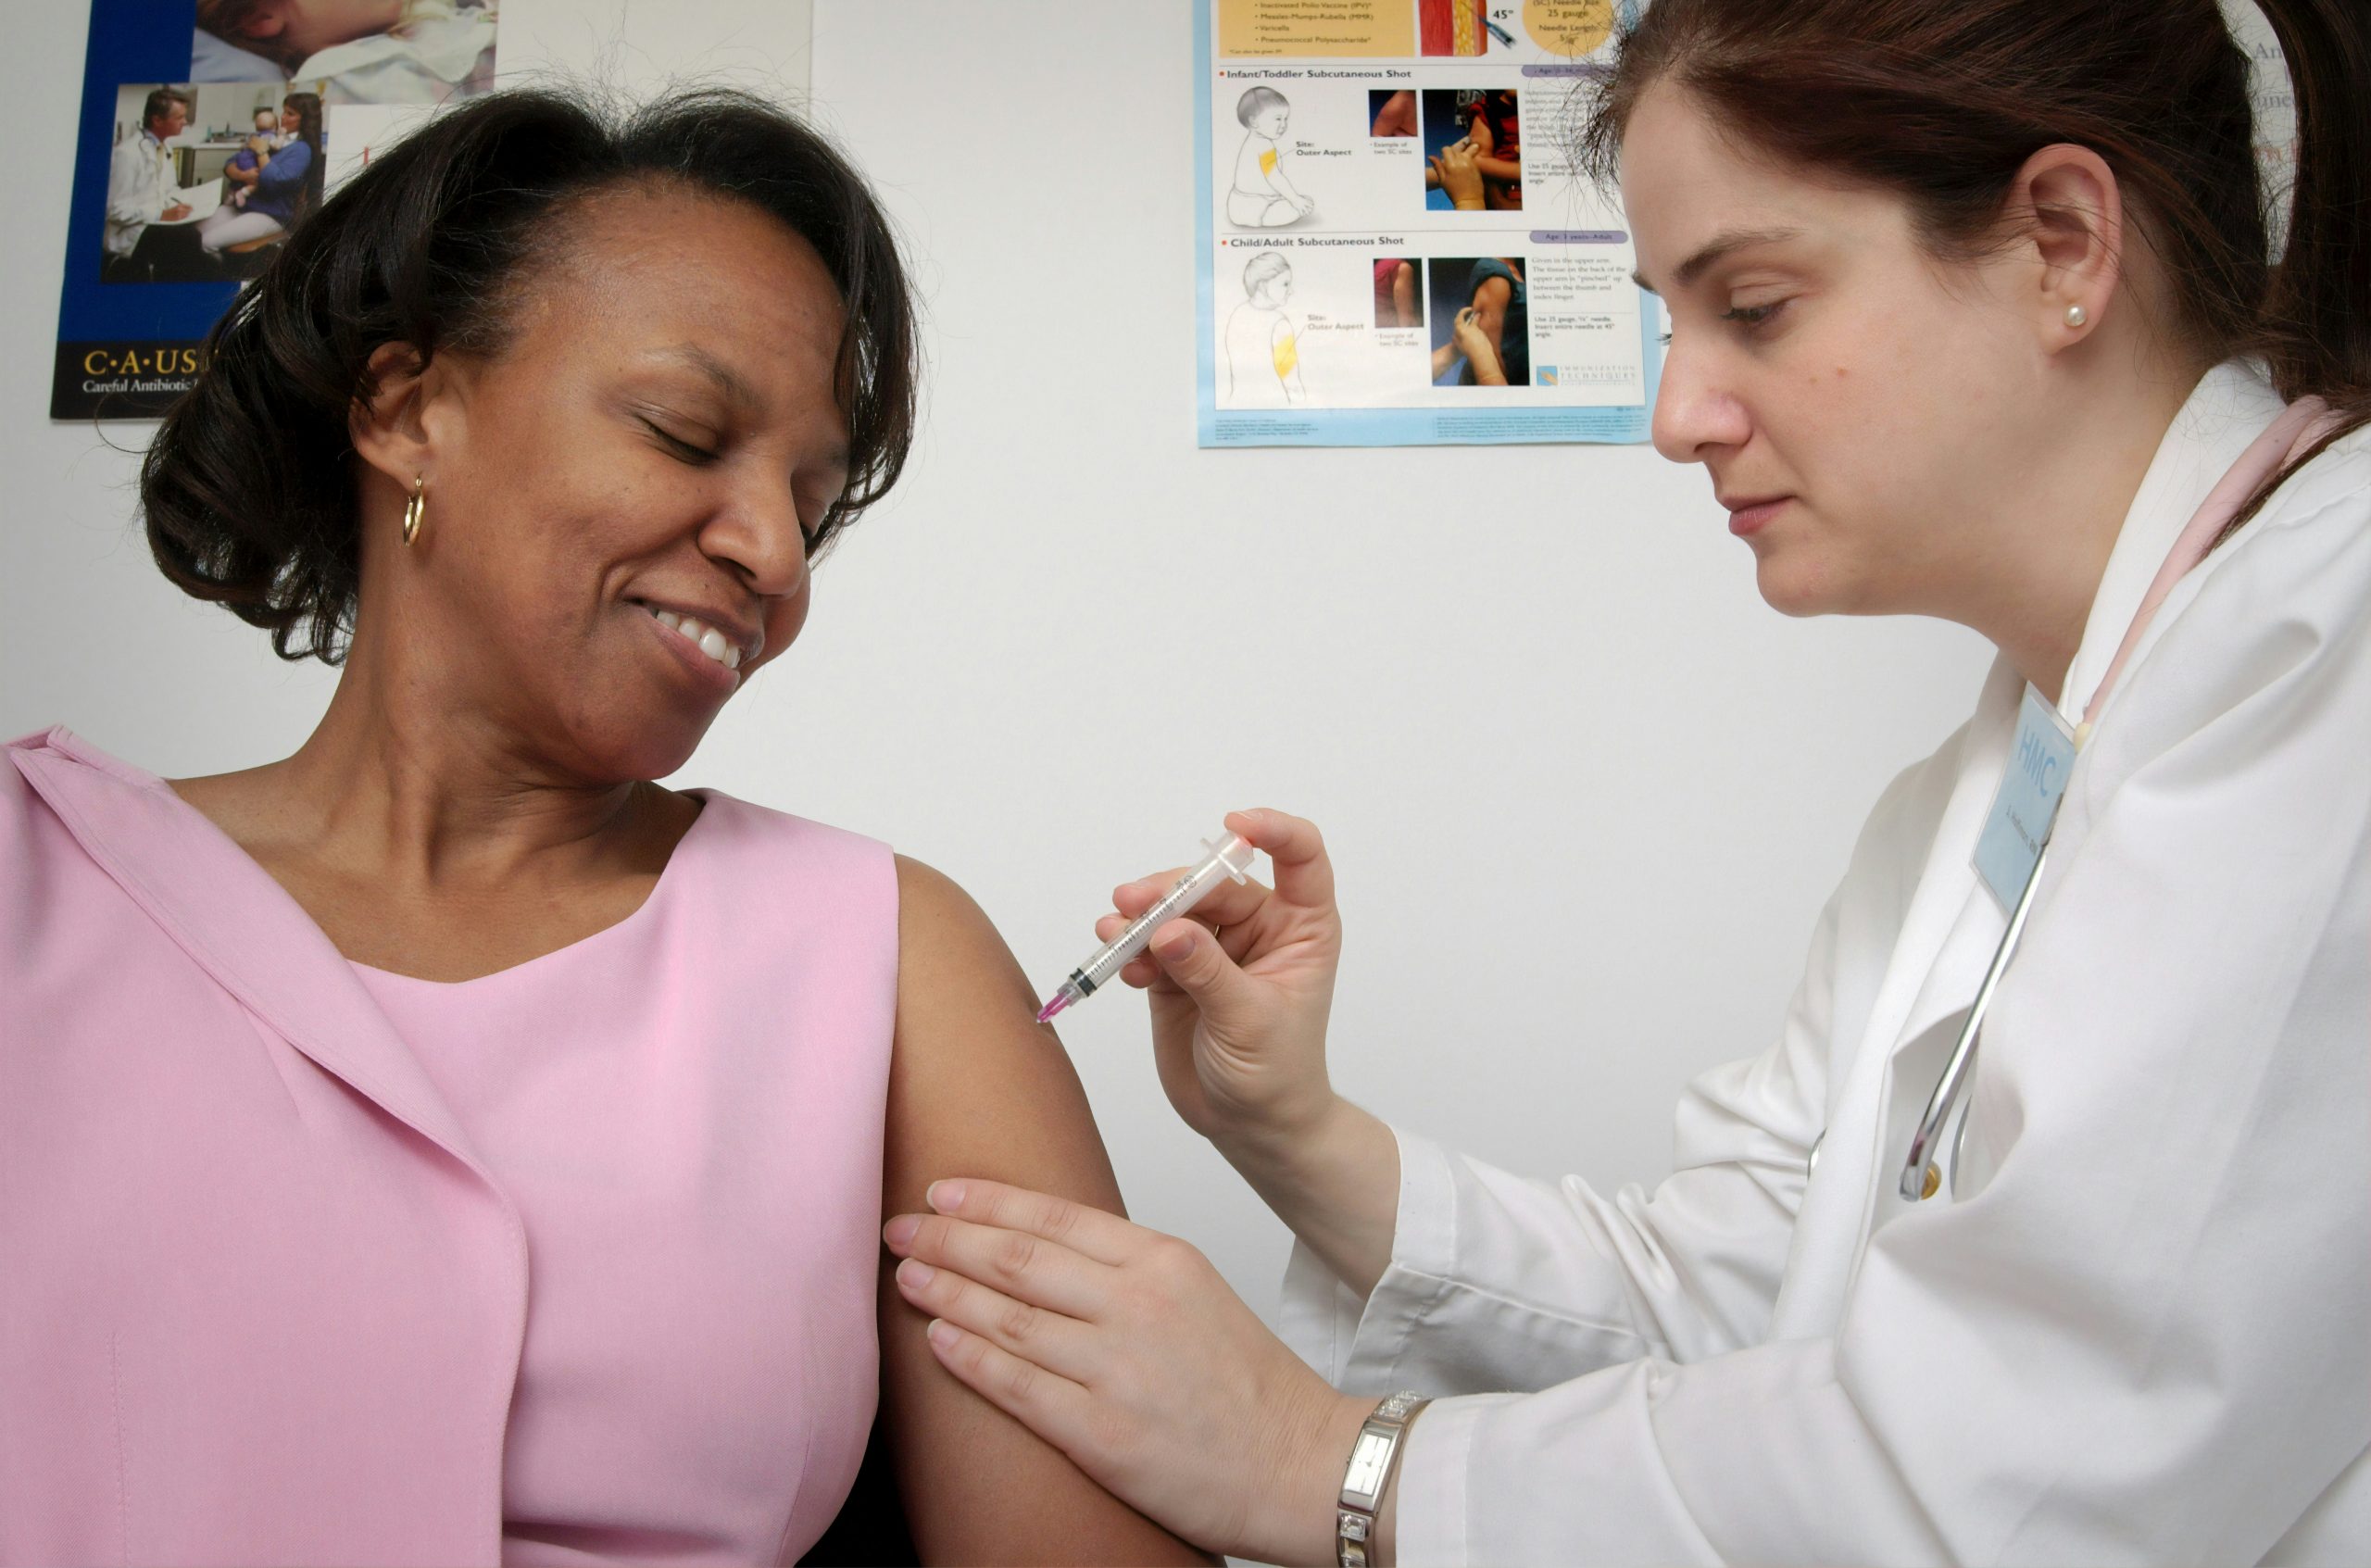 With Covid still here, ILC issues plea to support employee vaccinations